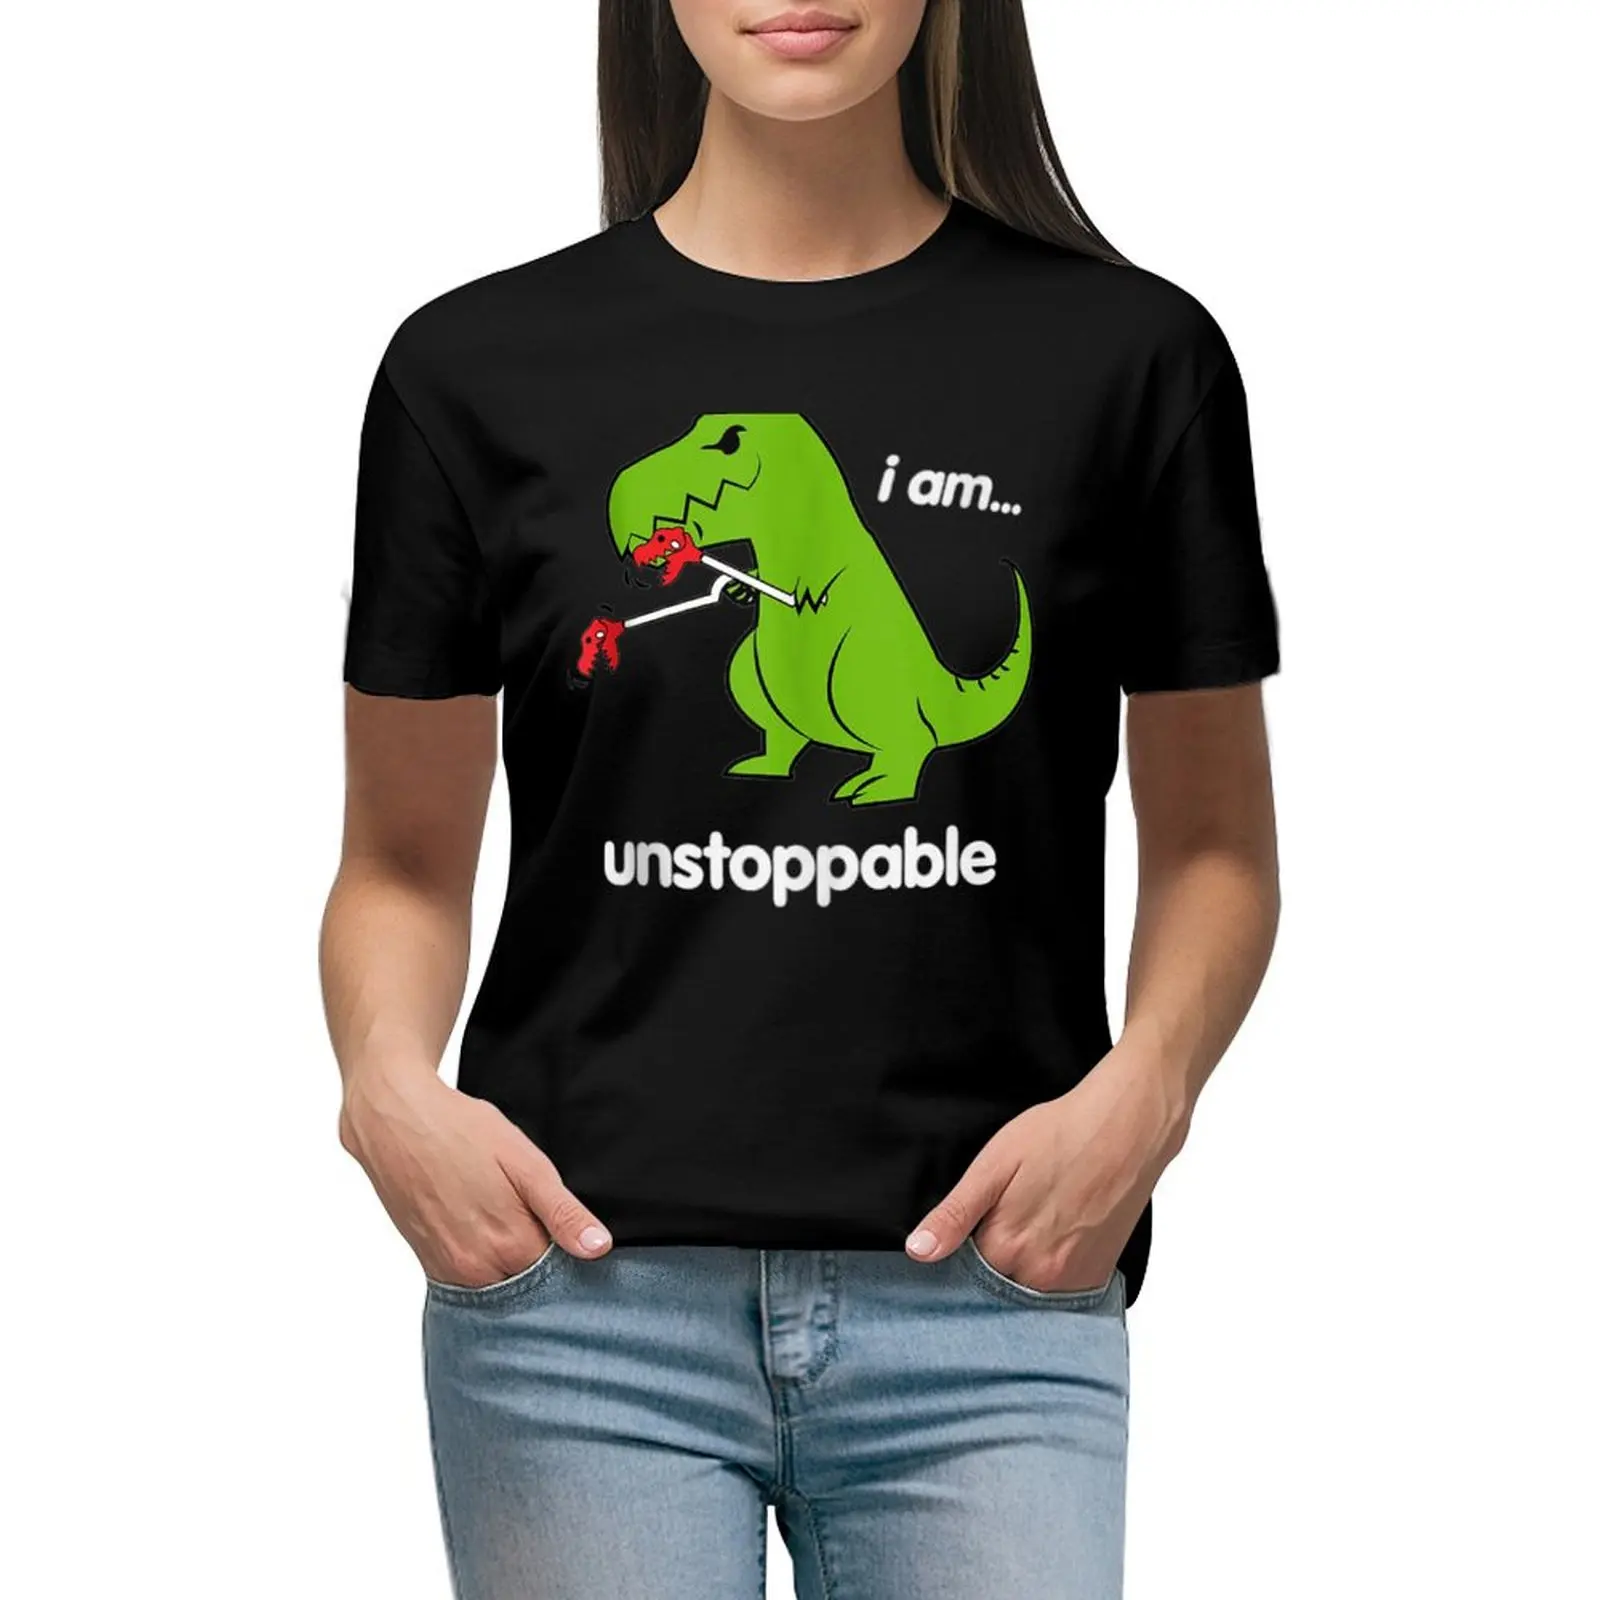 

I Am Unstoppable T-Rex Dinosaur Dino Cool Cute Humor Funny T-shirt Blouse funny t-shirt dress for Women graphic